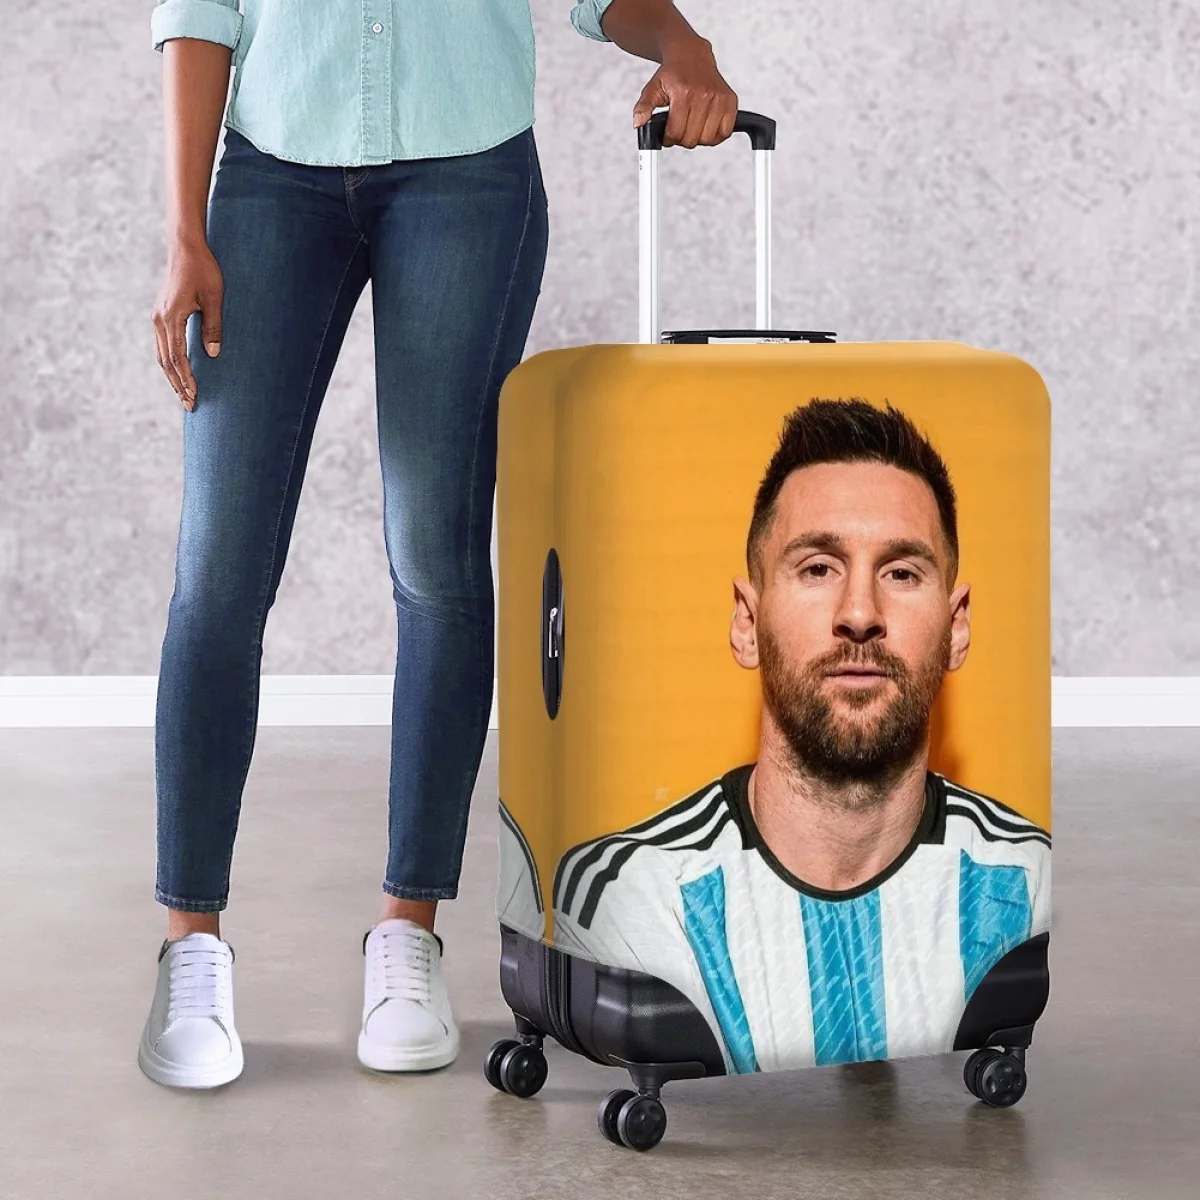 

Twoheartsgirl Messi Travel Luggage Cover Zipper Elasticity Baggage Covers Protector Removeable Fits 18''-32'' Inch Suitcase Case